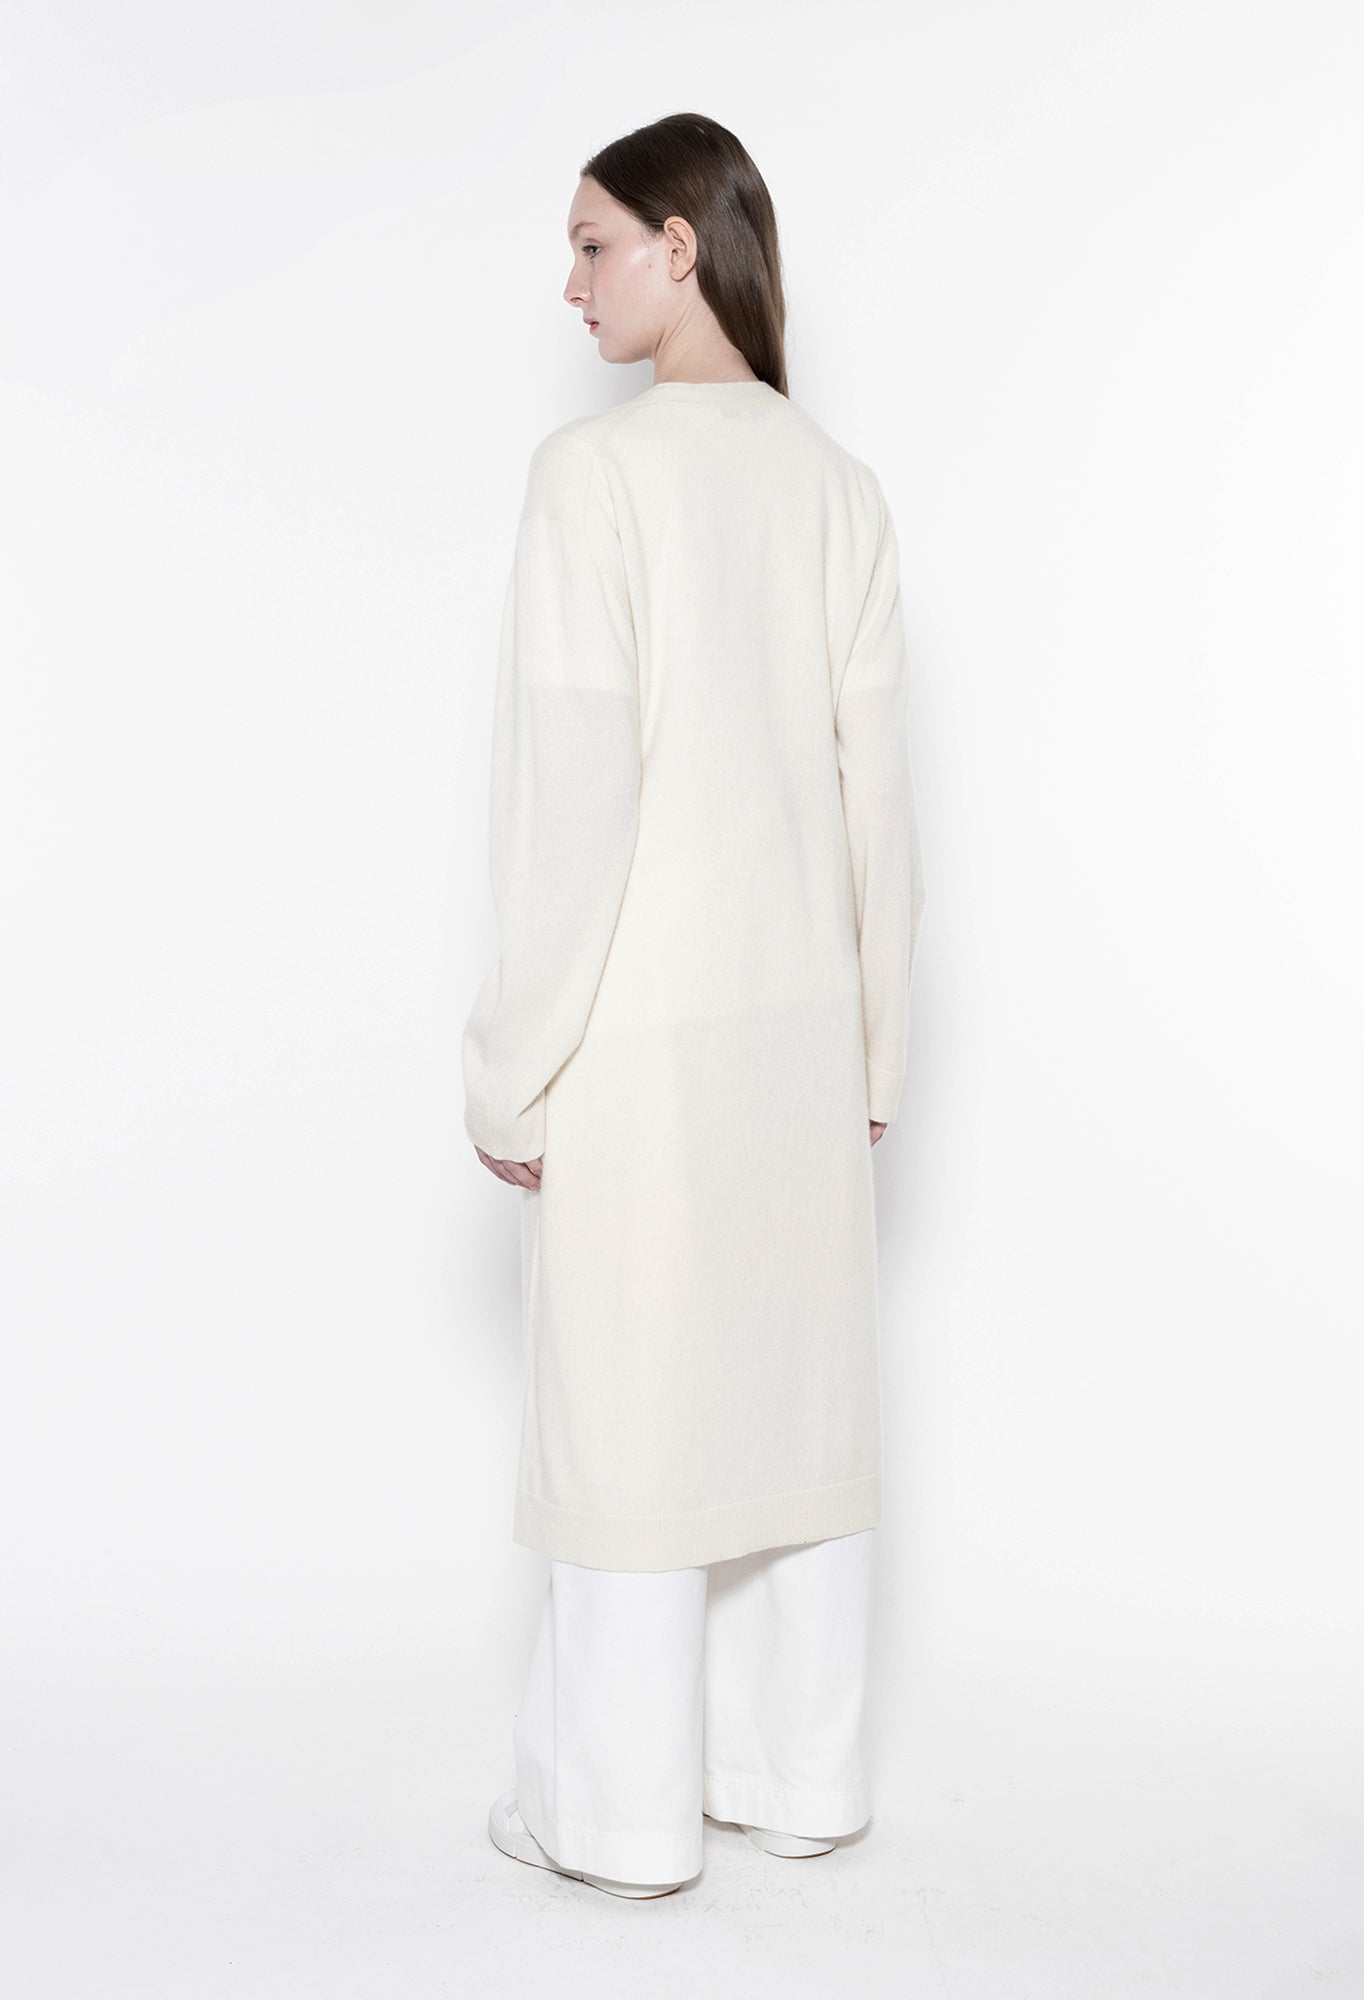 XIN - 12gg Cashmere Cardigan in Undyed White